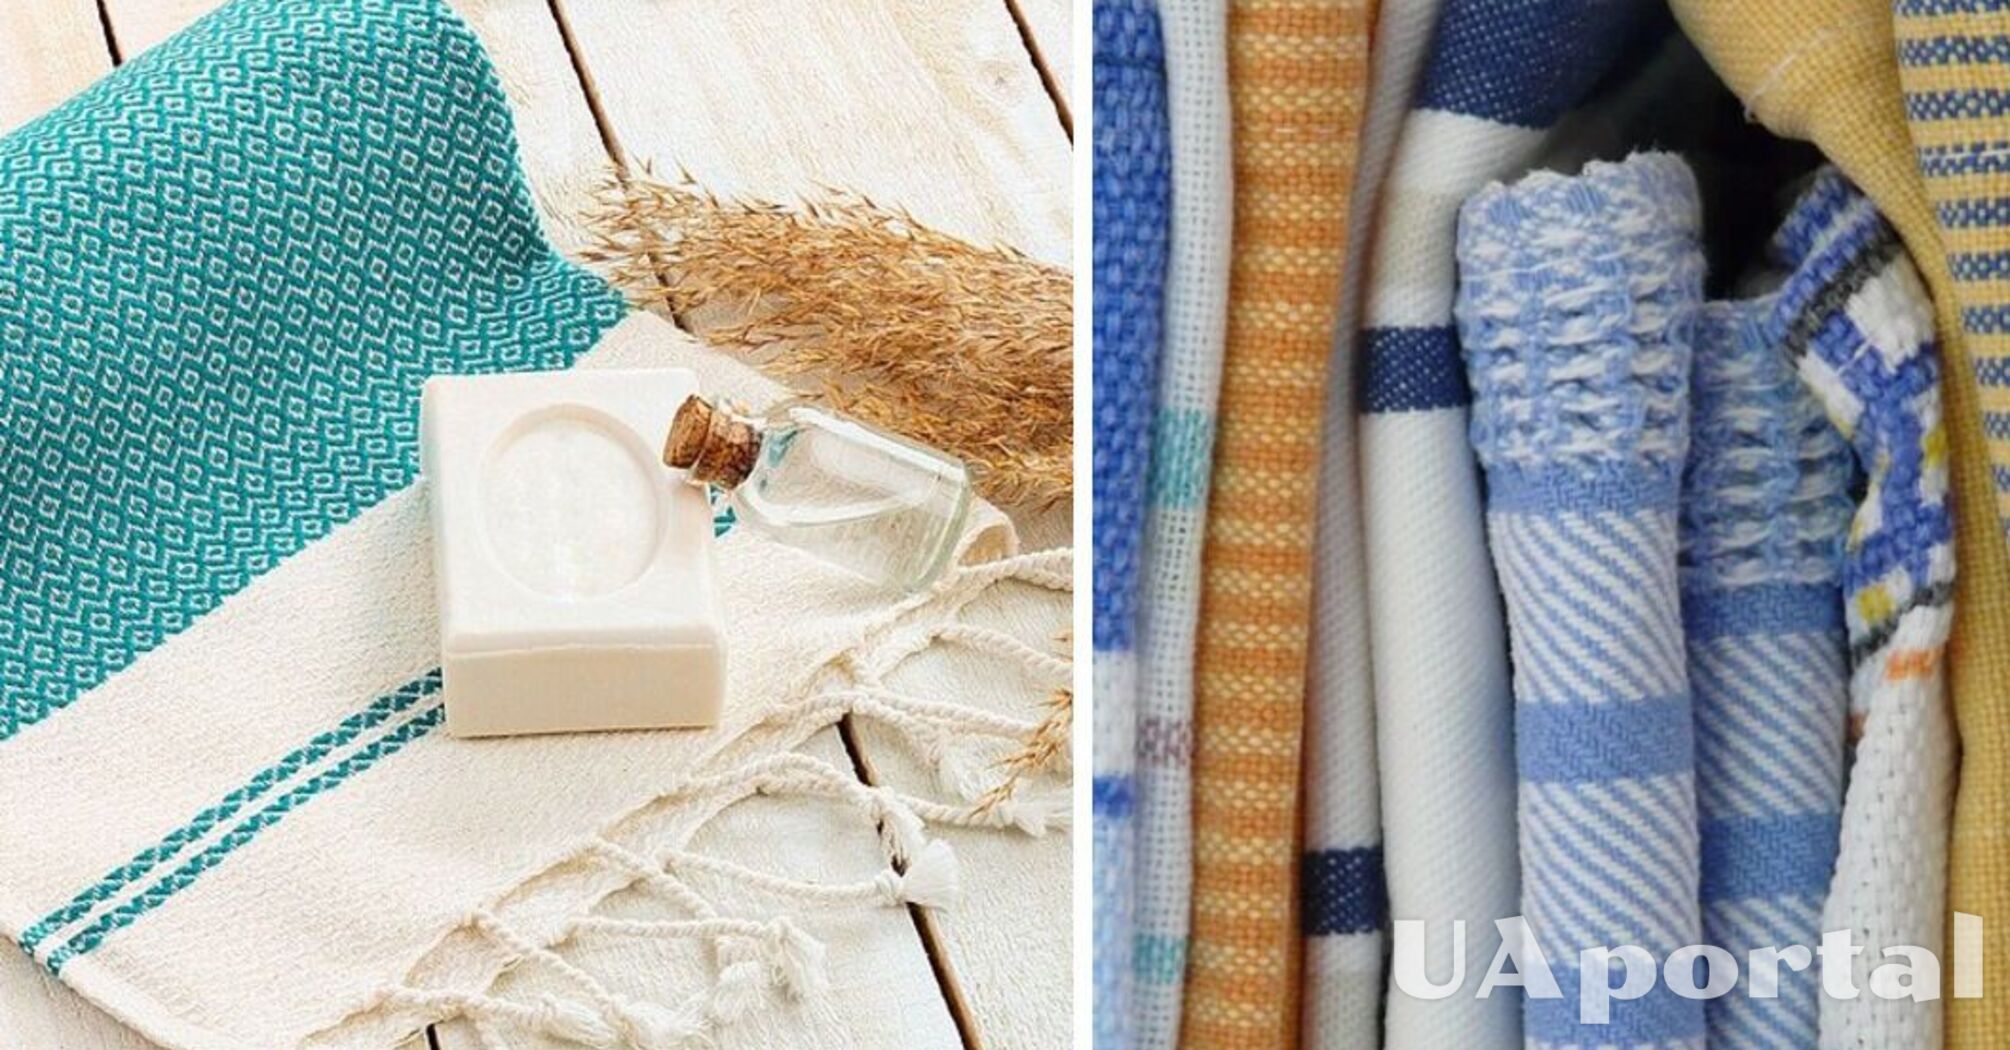 How to remove stubborn stains from kitchen towels